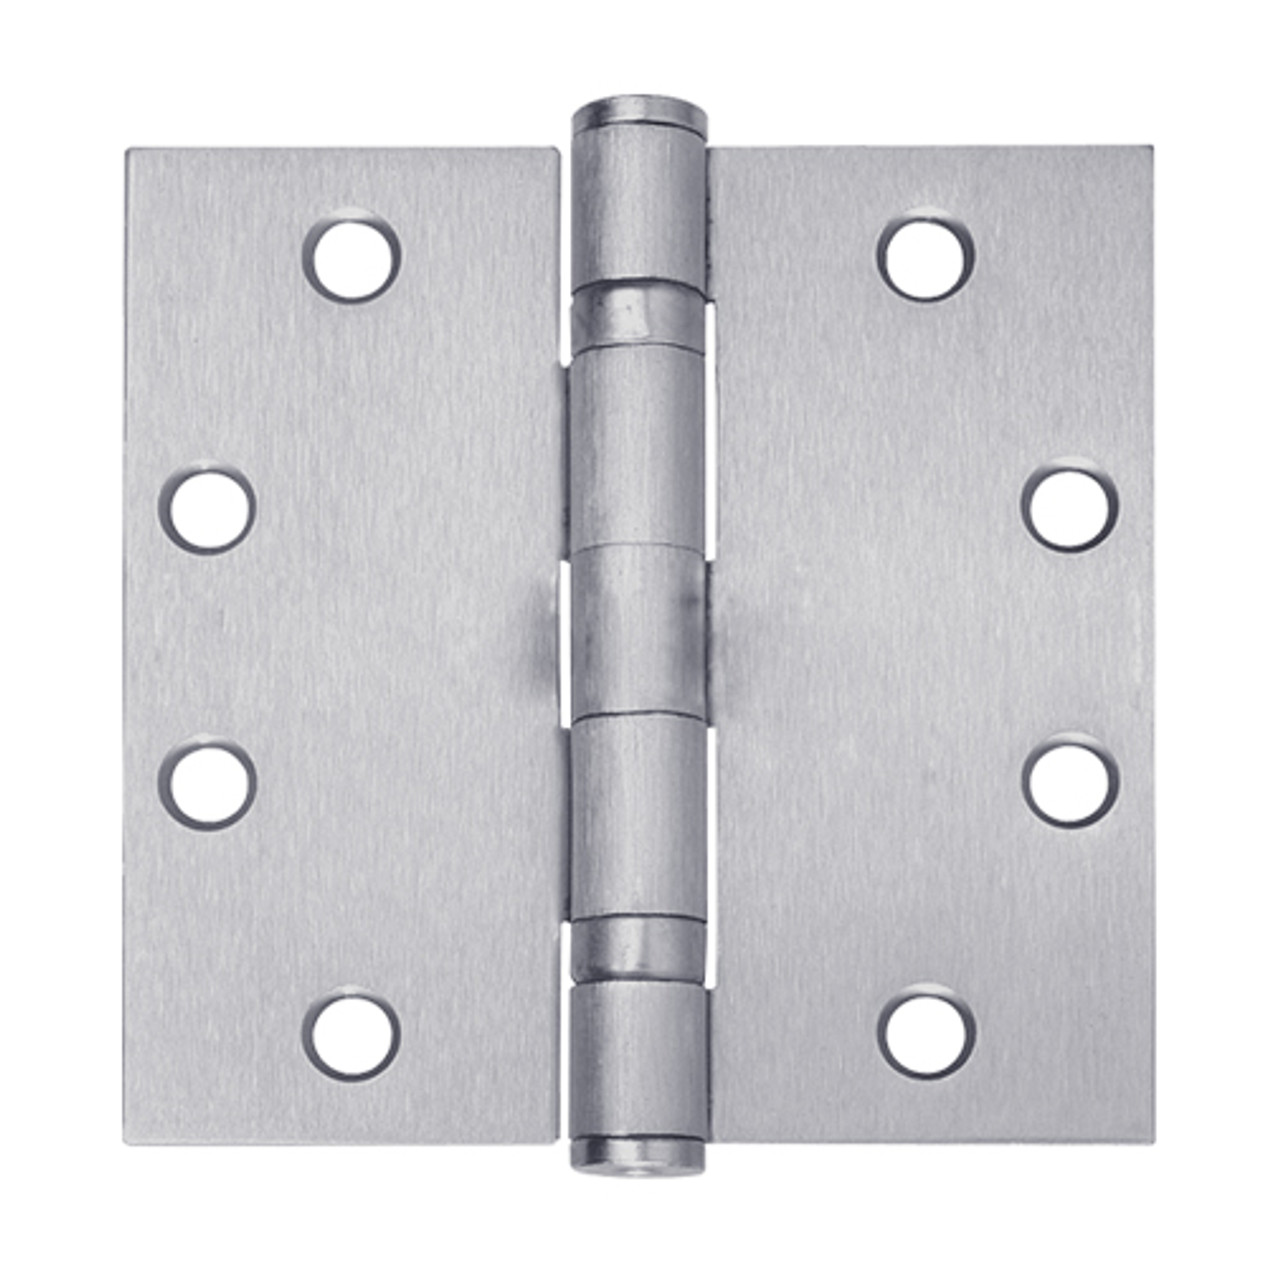 5BB1-4-5x4-5-626-TW8 IVES 5 Knuckle Ball Bearing Full Mortise Hinge with Electric Thru-Wire in Satin Chrome